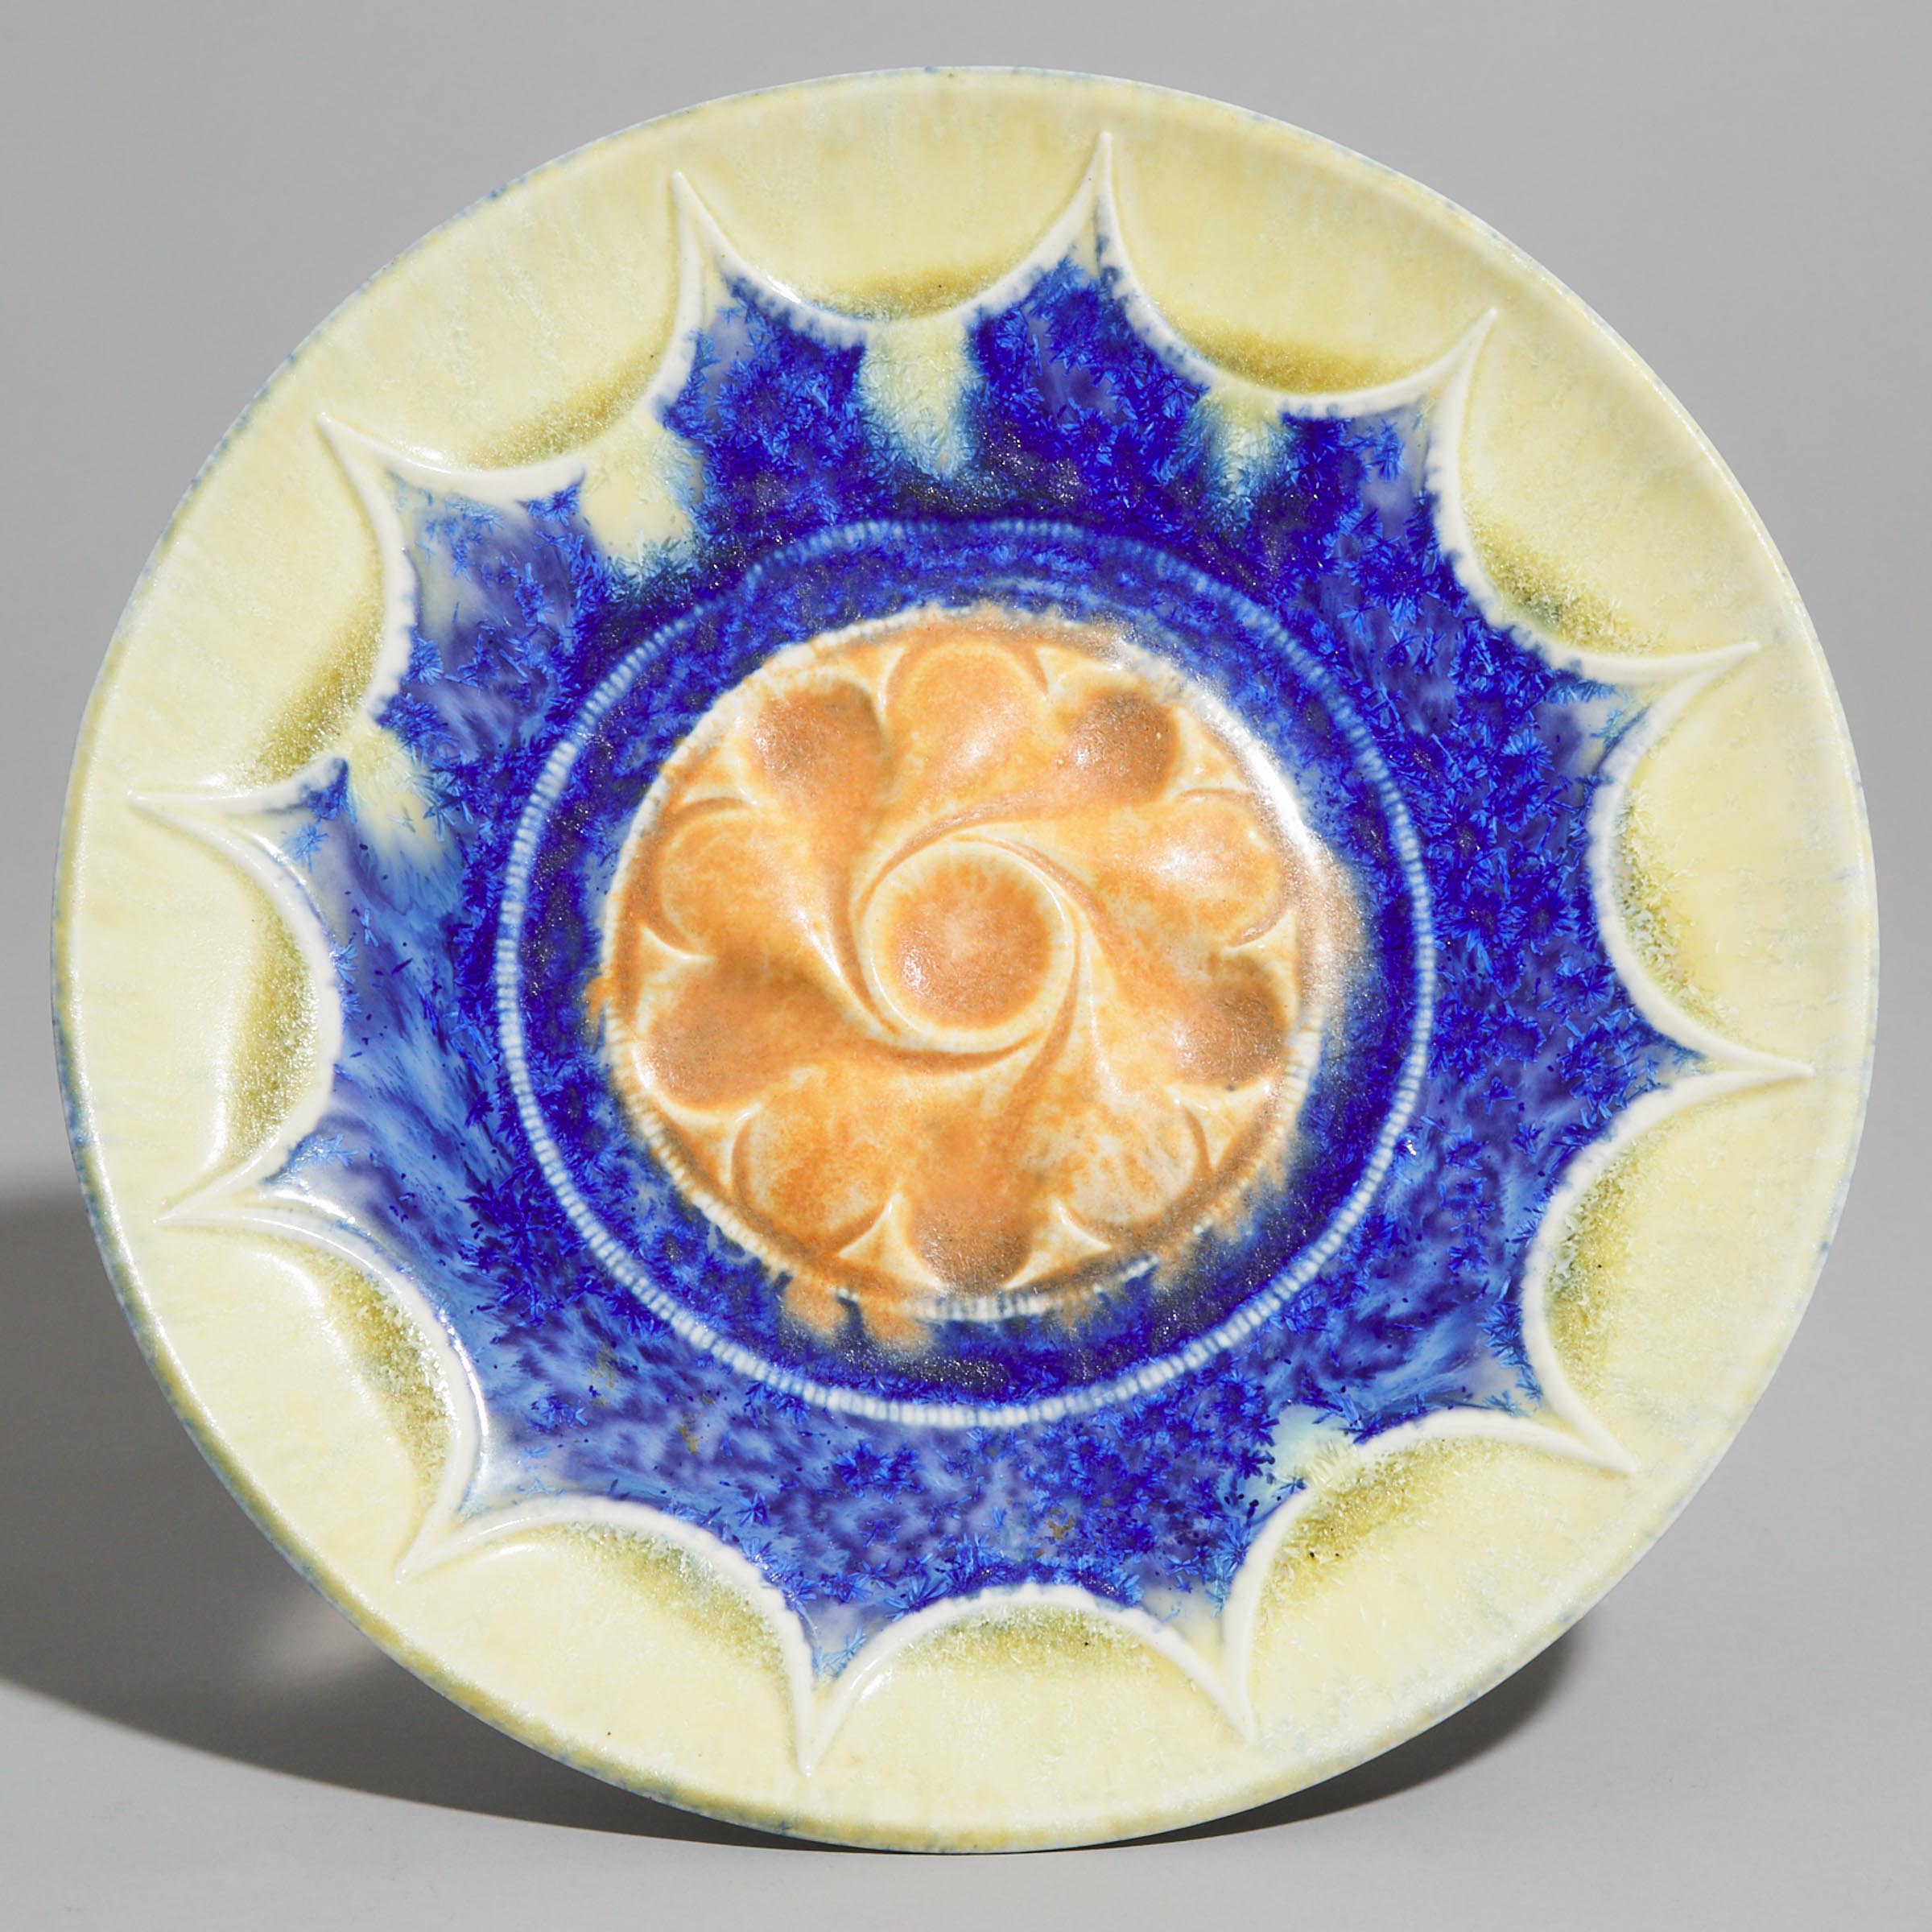 Ruskin Moulded Circular Wall Plaque, c.1930